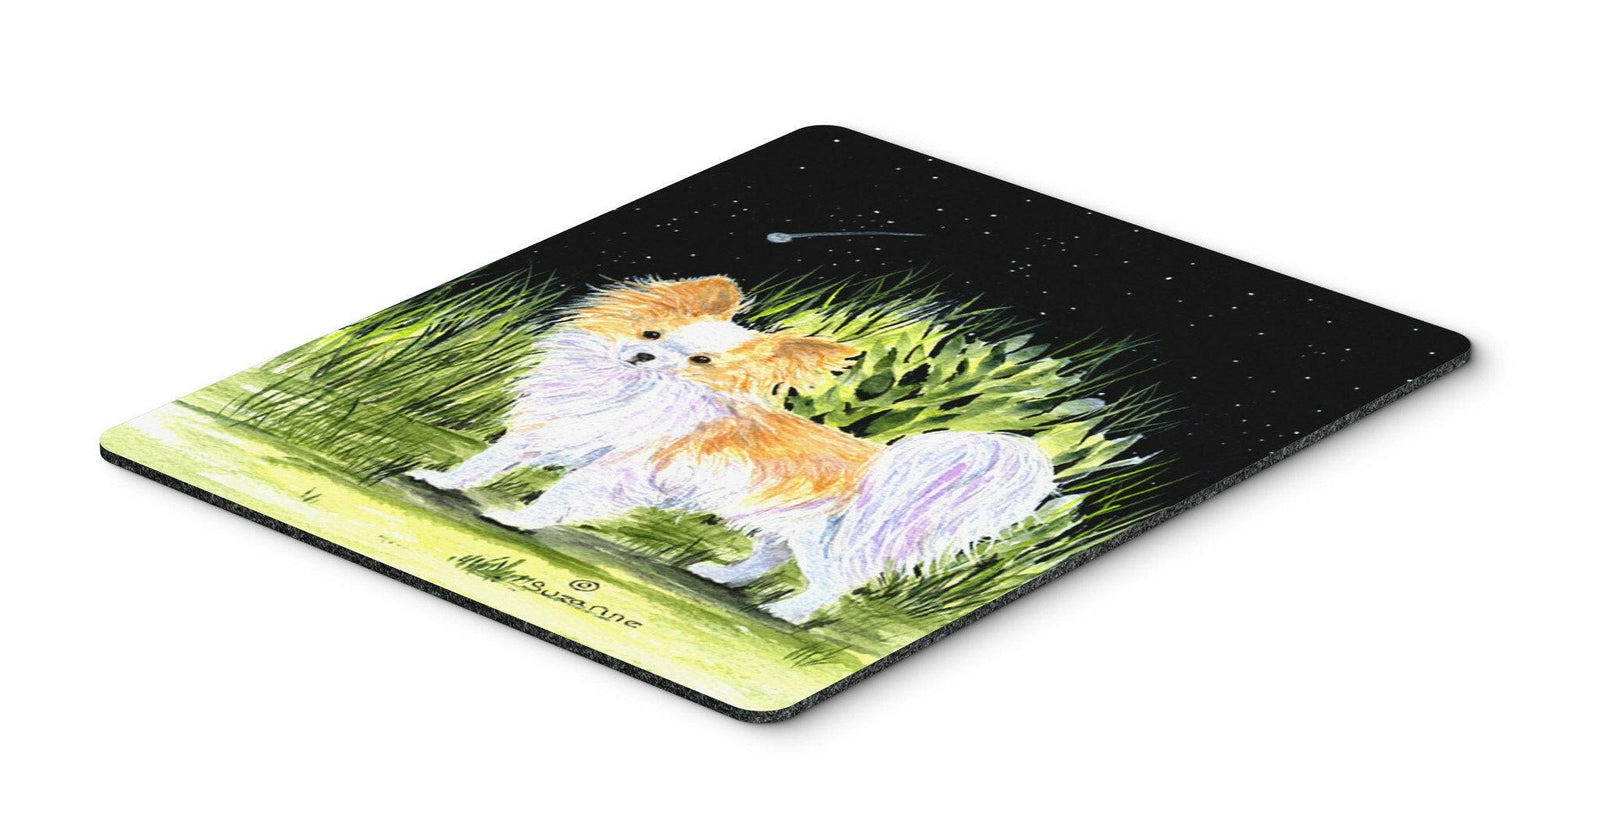 Starry Night Chihuahua Mouse Pad, Hot Pad or Trivet by Caroline's Treasures